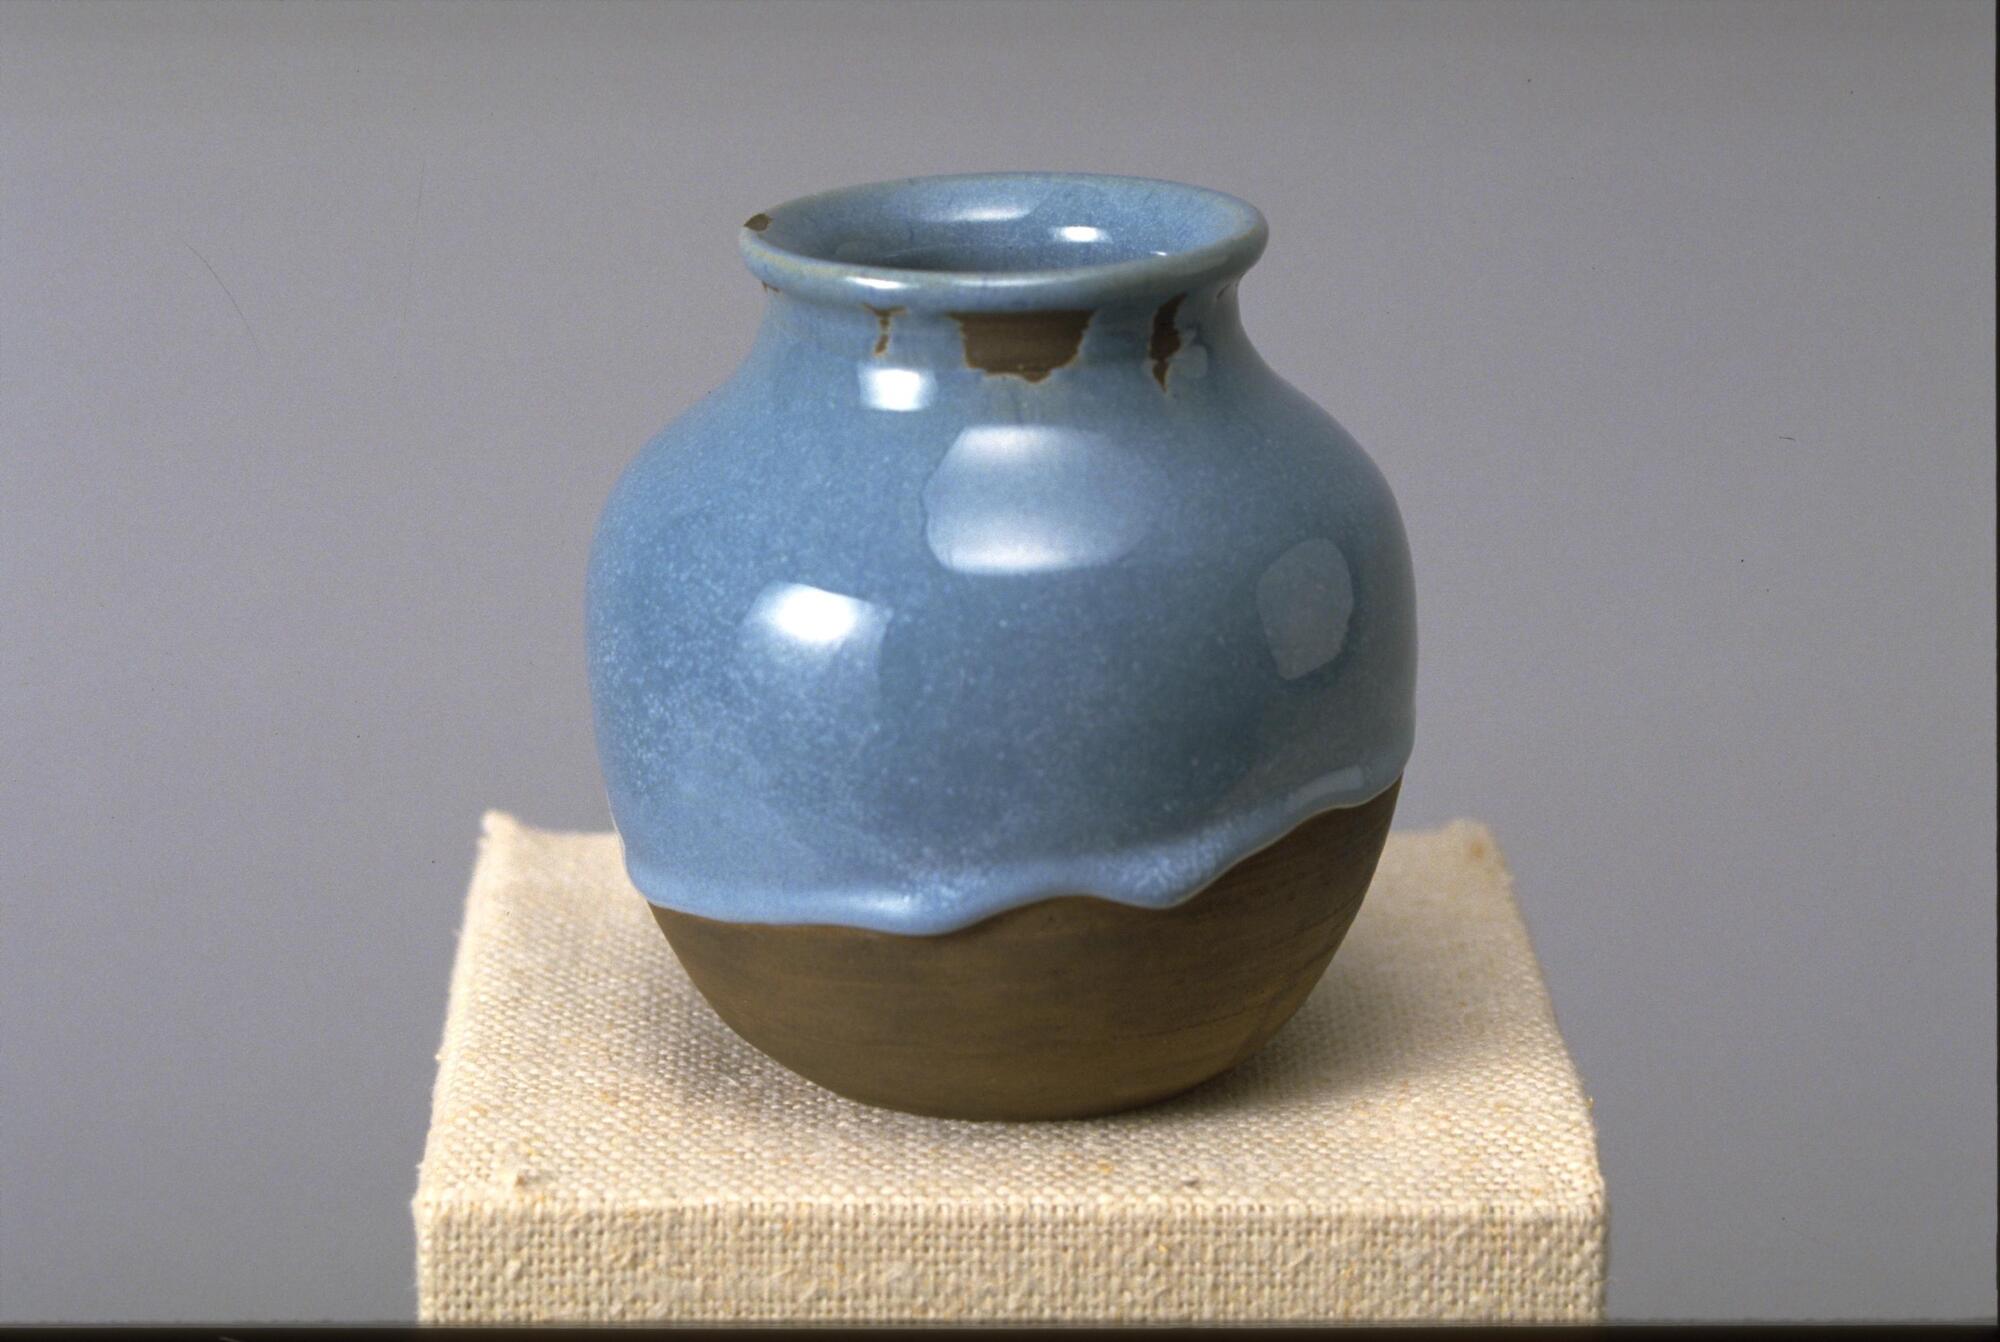 Vessel with rounded body, short neck and wide mouth. Brown clay body with wiped on black slip is covered with a pearlescent thick sky blue glaze dripping down two-thirds of the vessel.